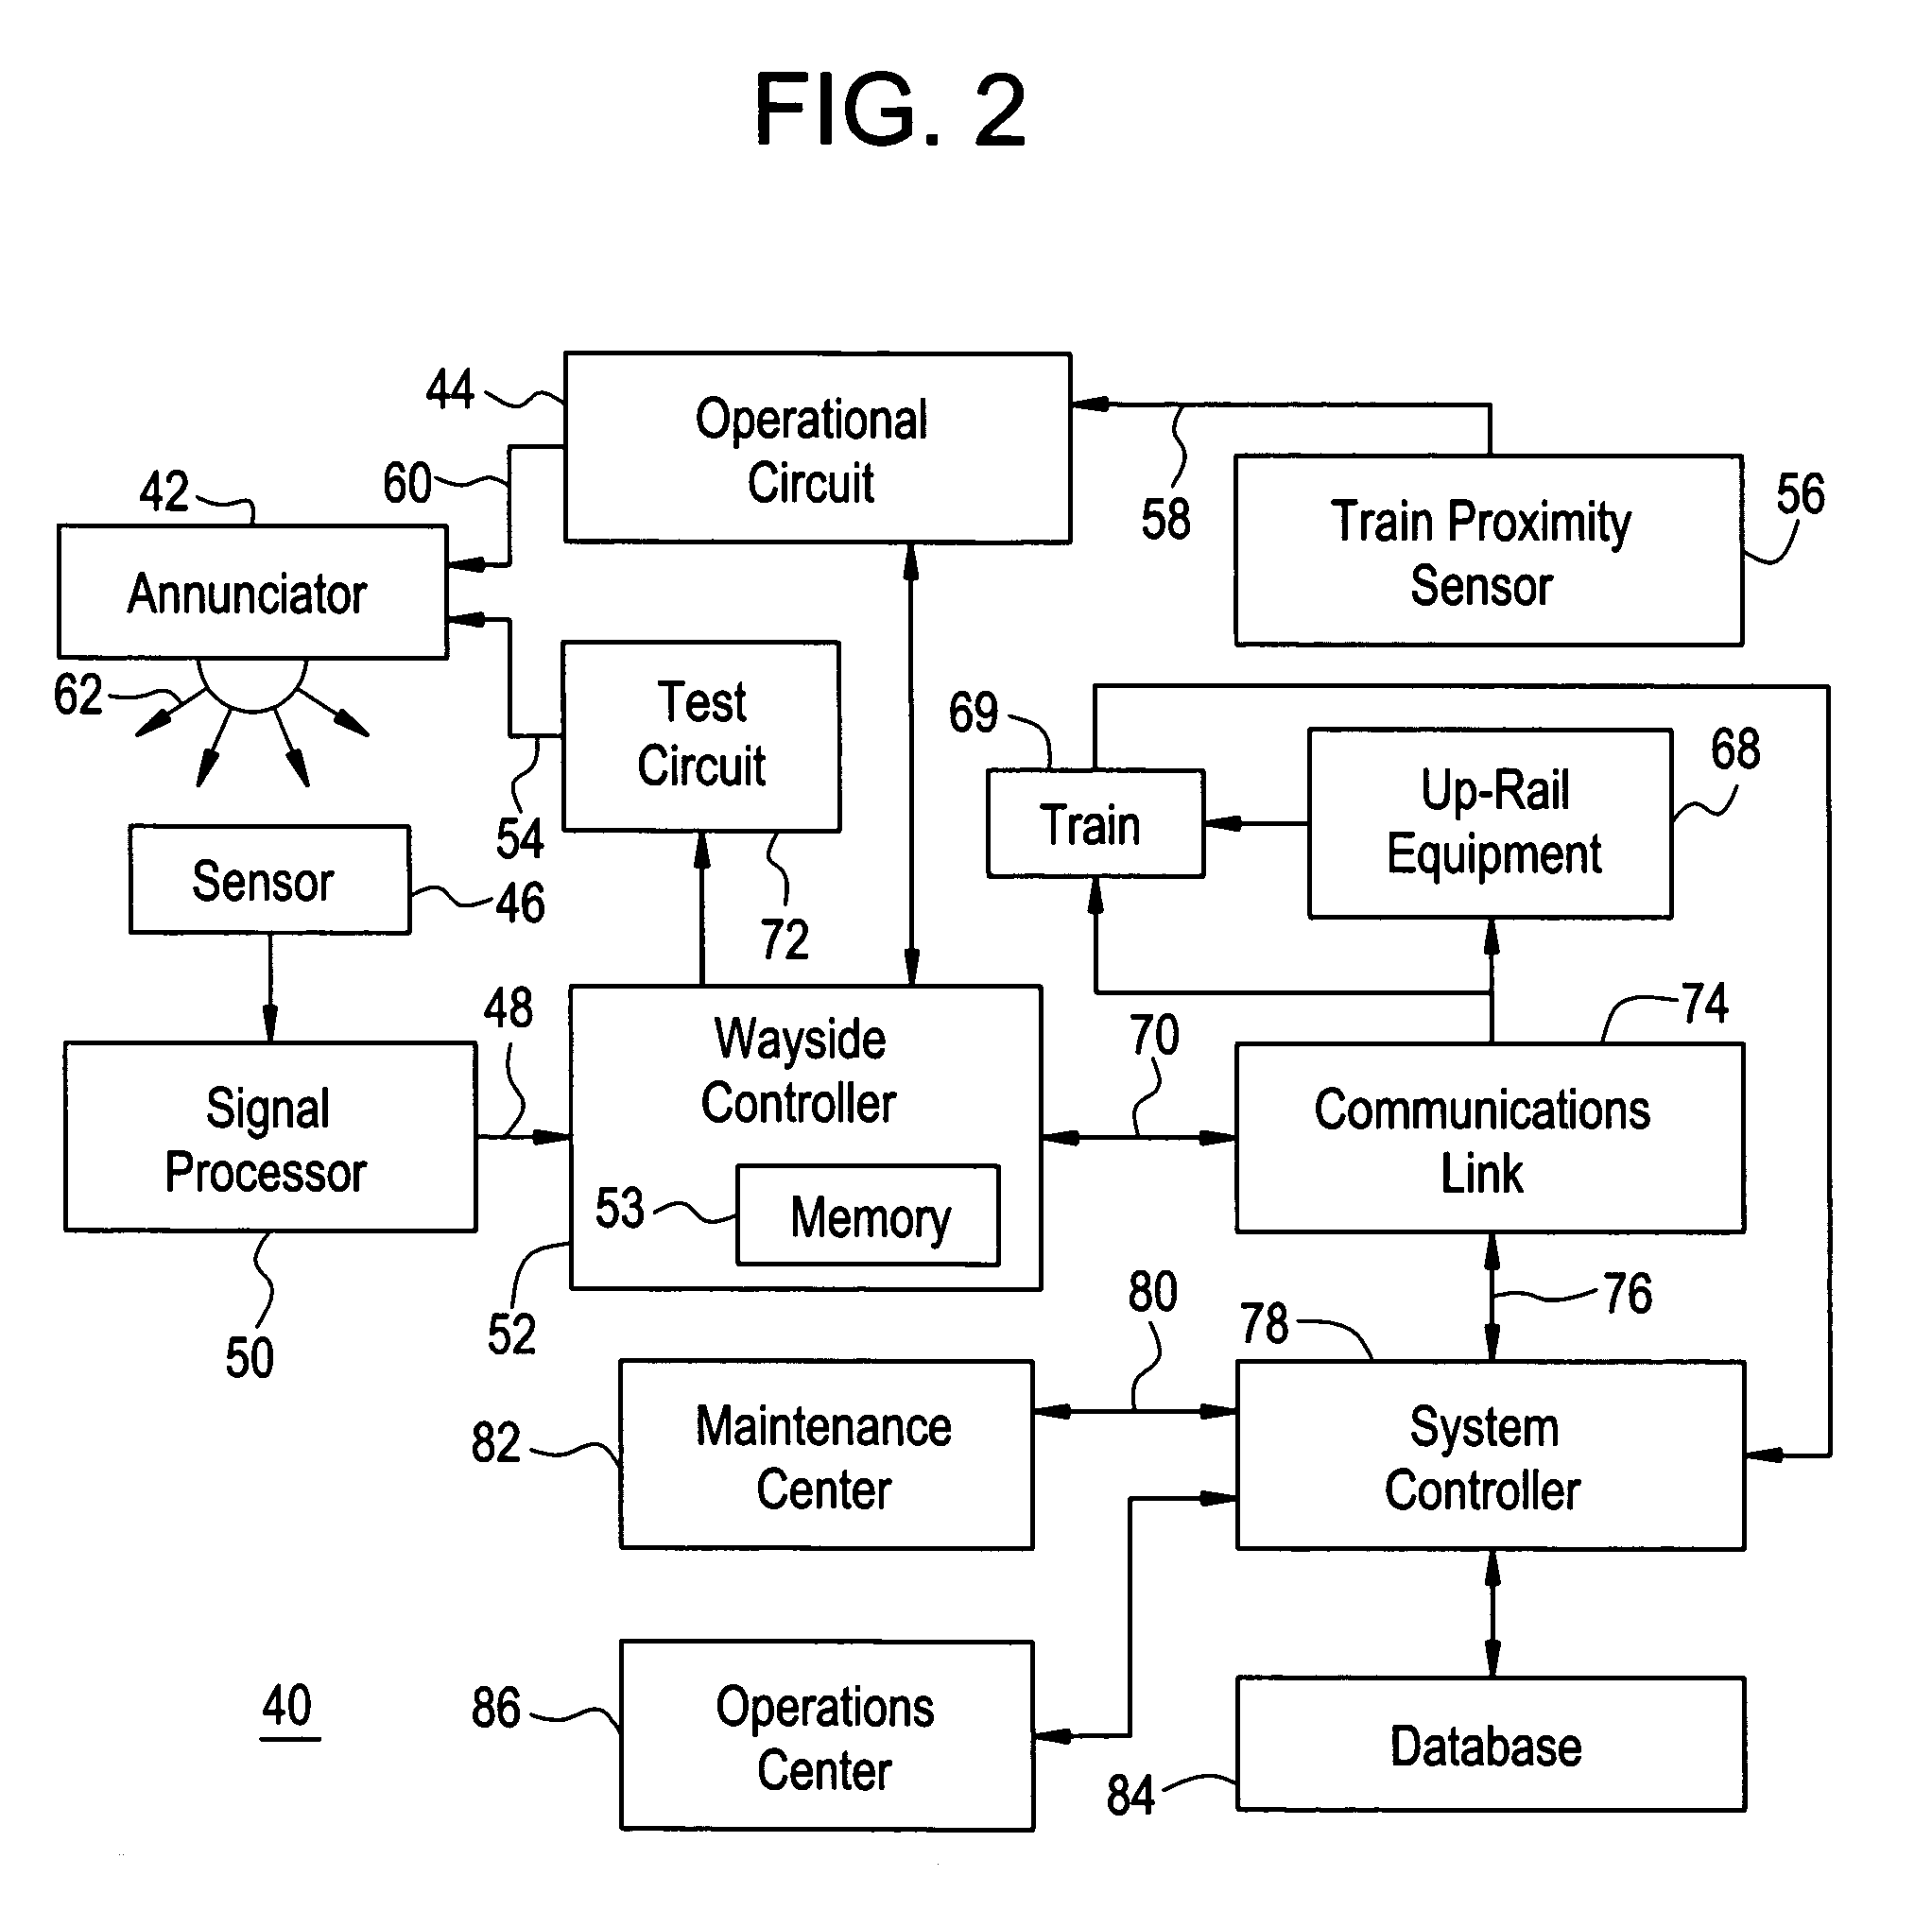 Apparatus and method for monitoring the output of a warning or indicator light